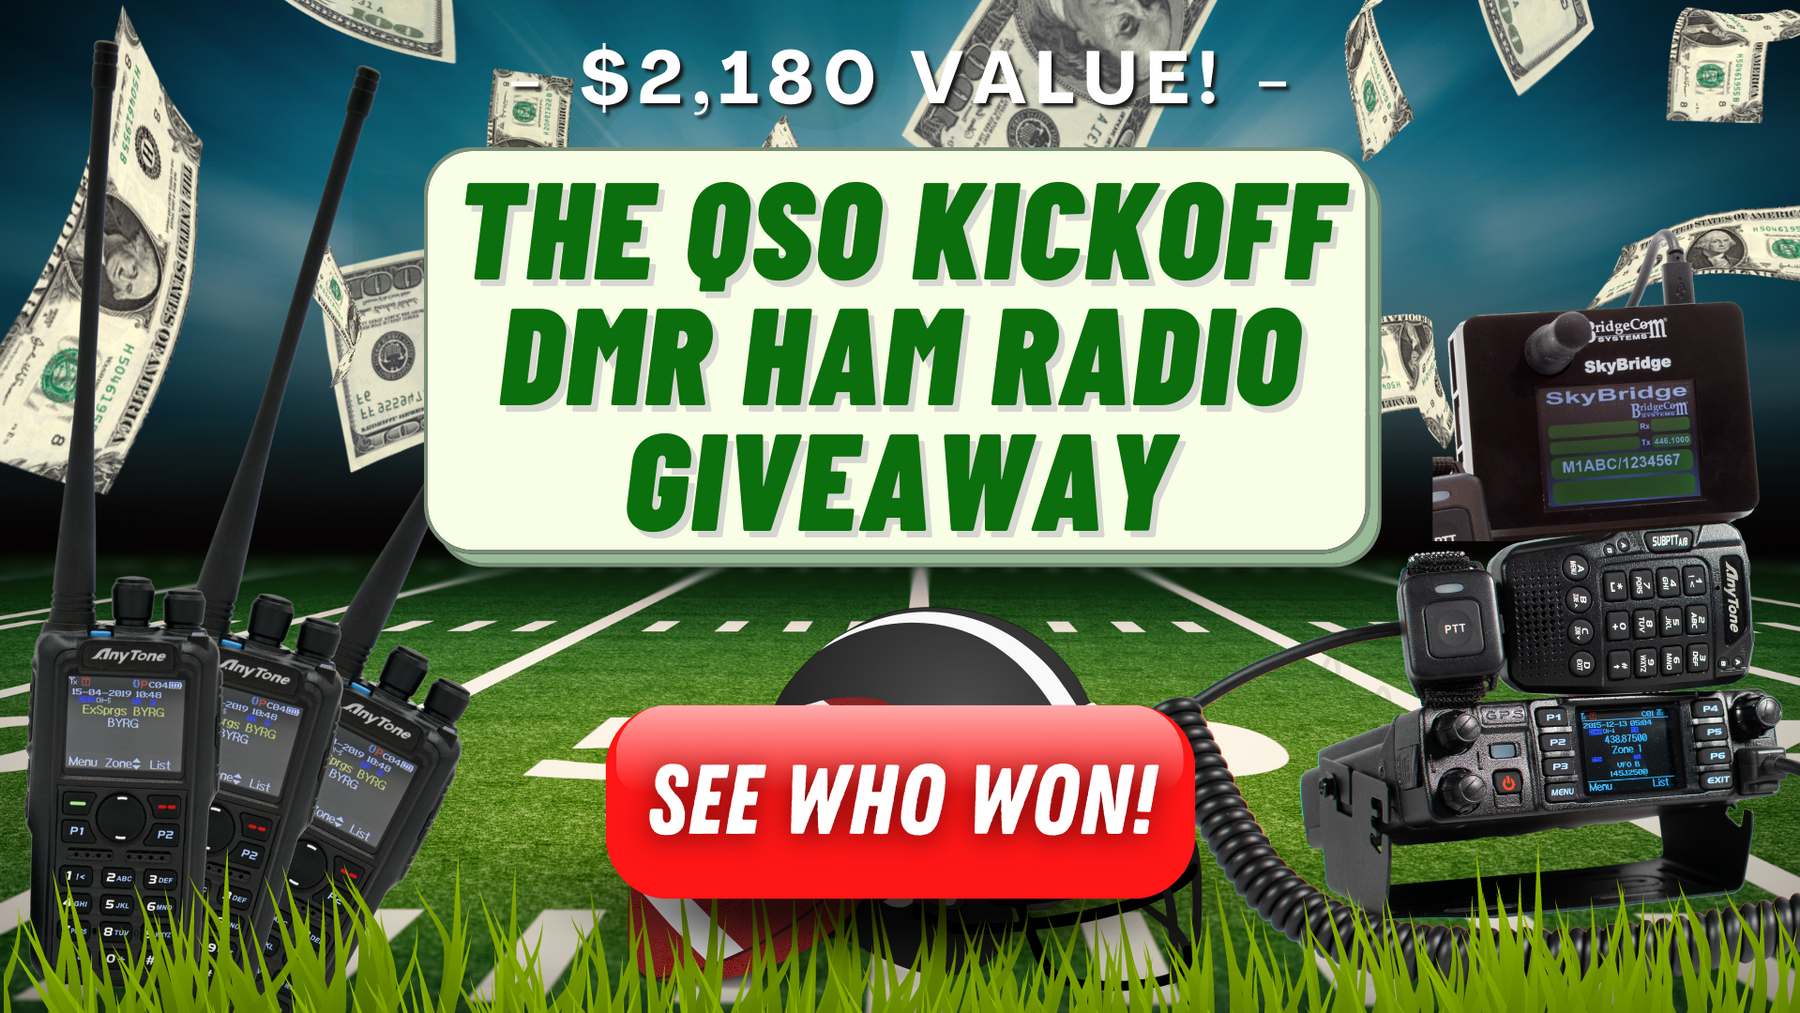 QSO Kickoff Giveaway Winner Announcement!